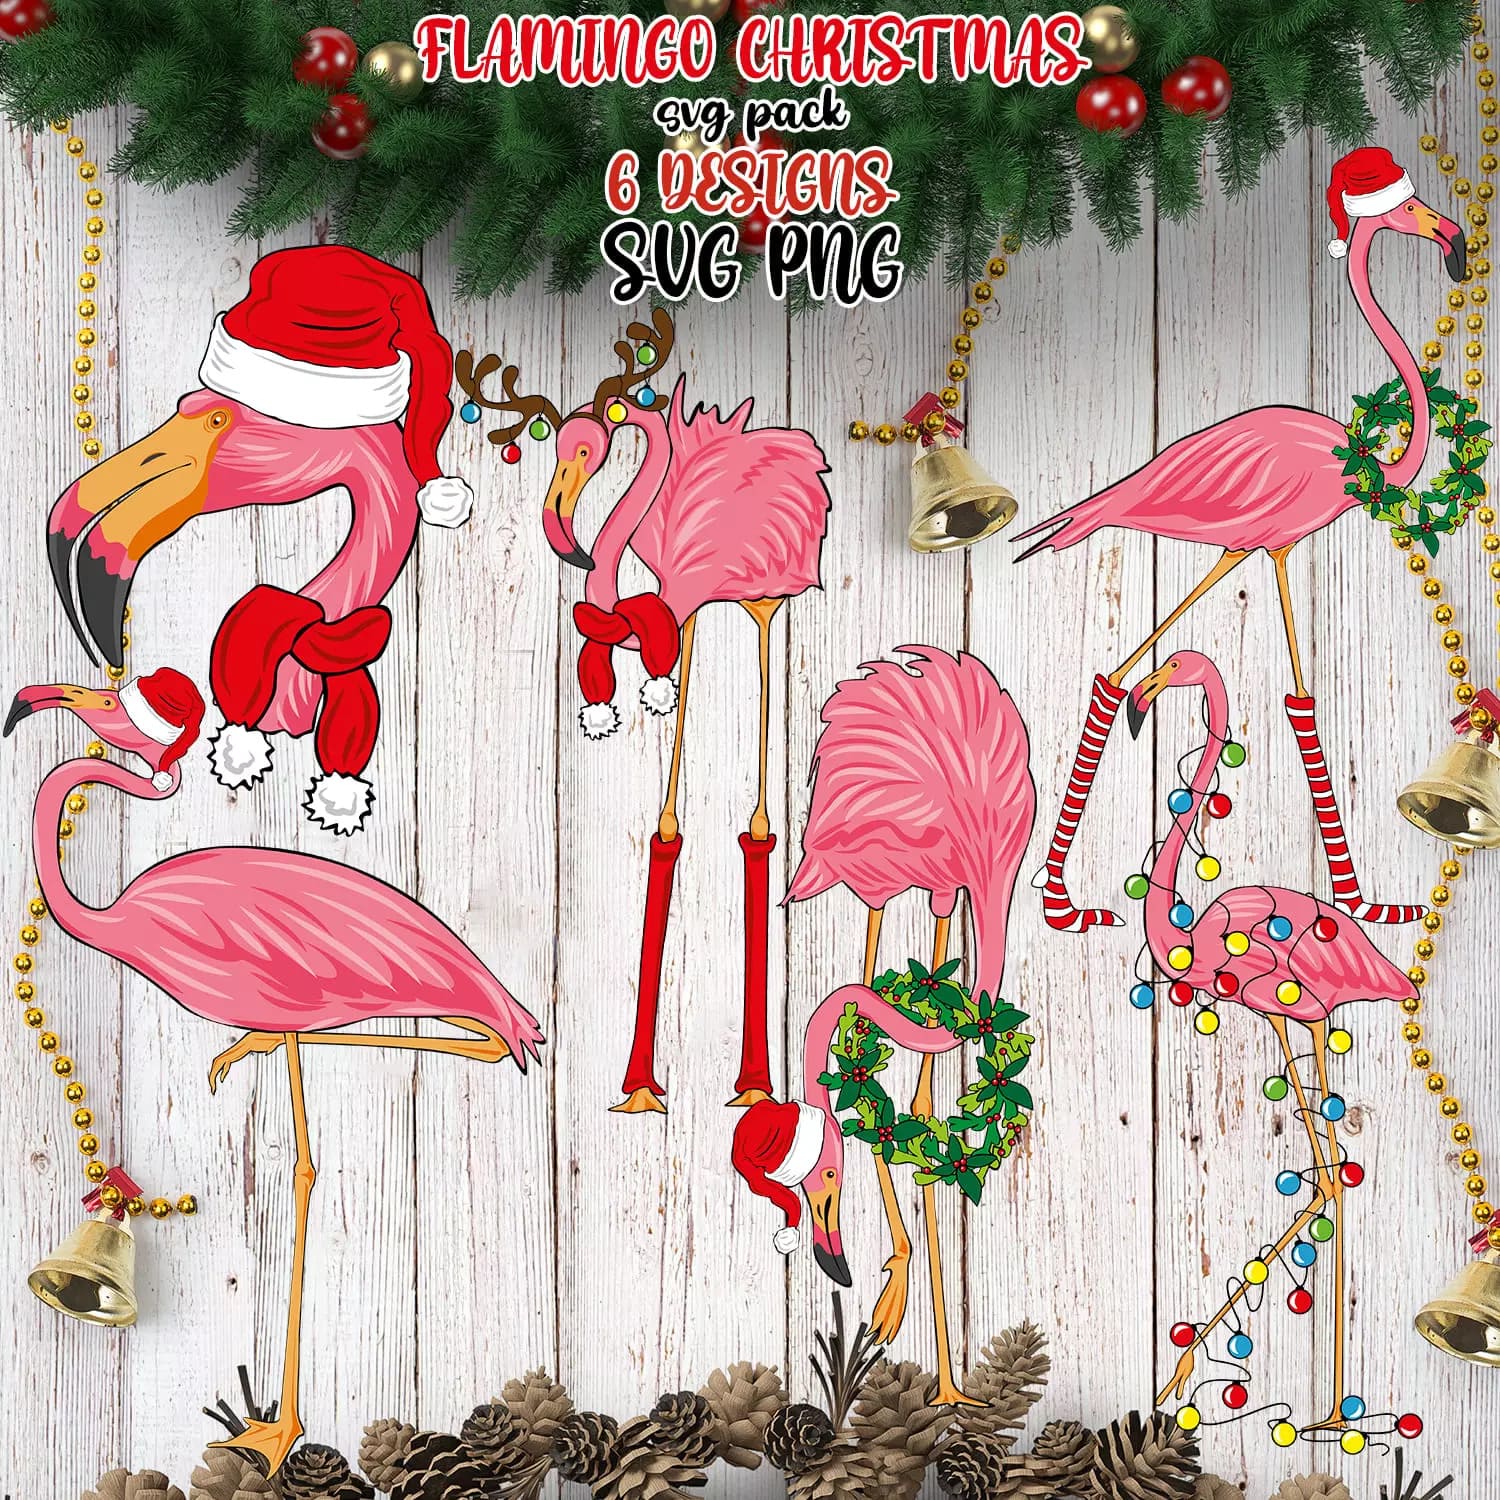 Flamingos with christmas decorations and pine cones on a wooden background.